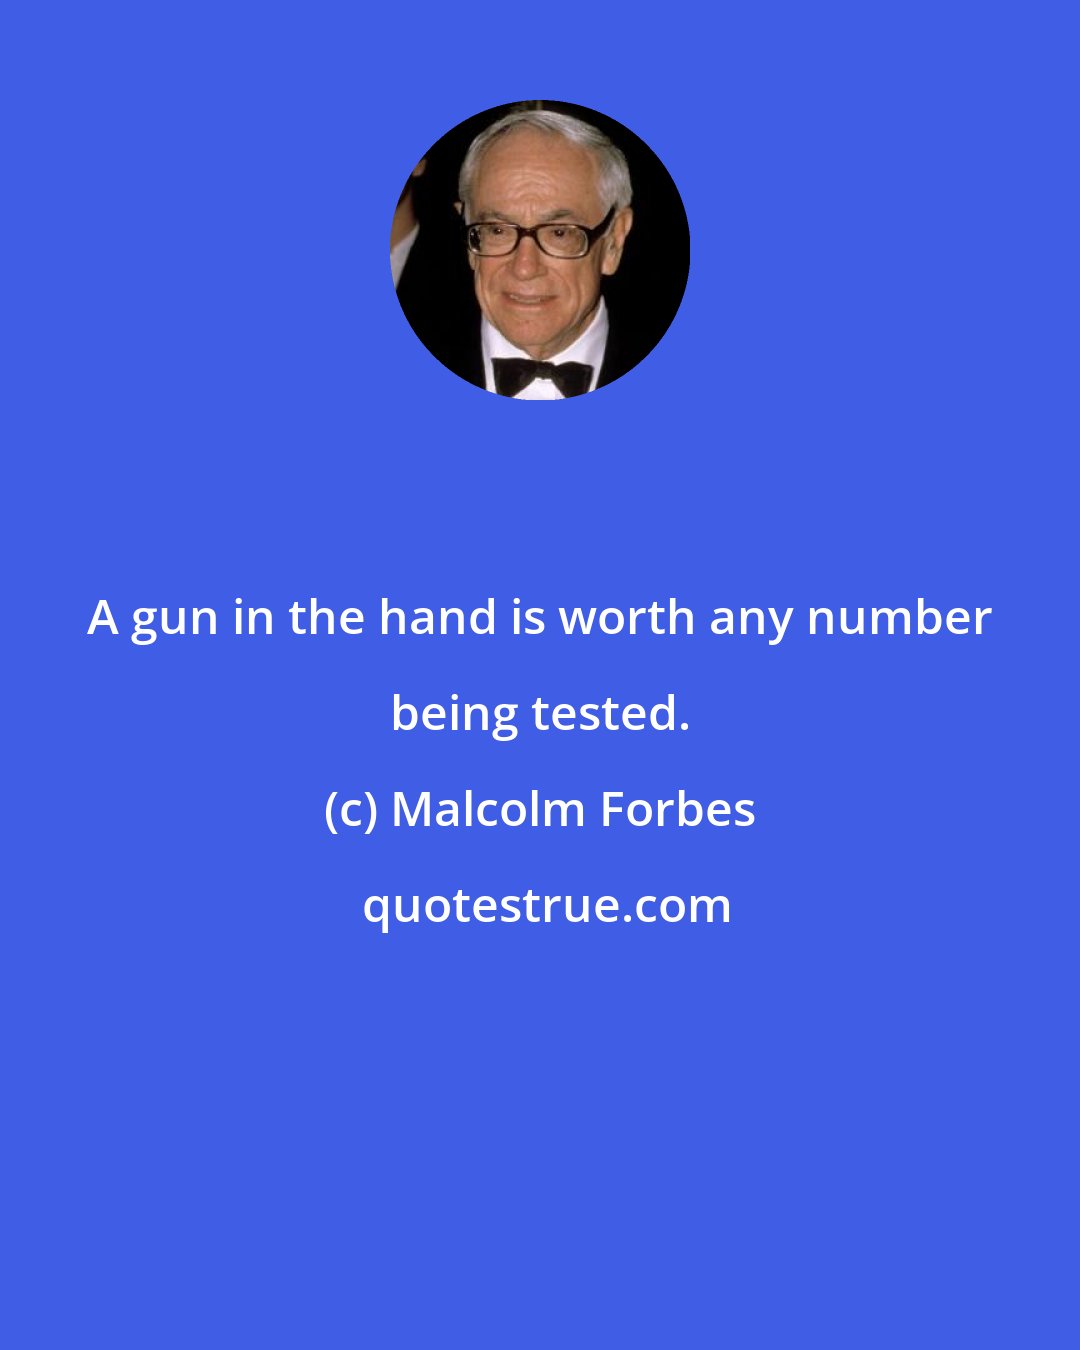 Malcolm Forbes: A gun in the hand is worth any number being tested.